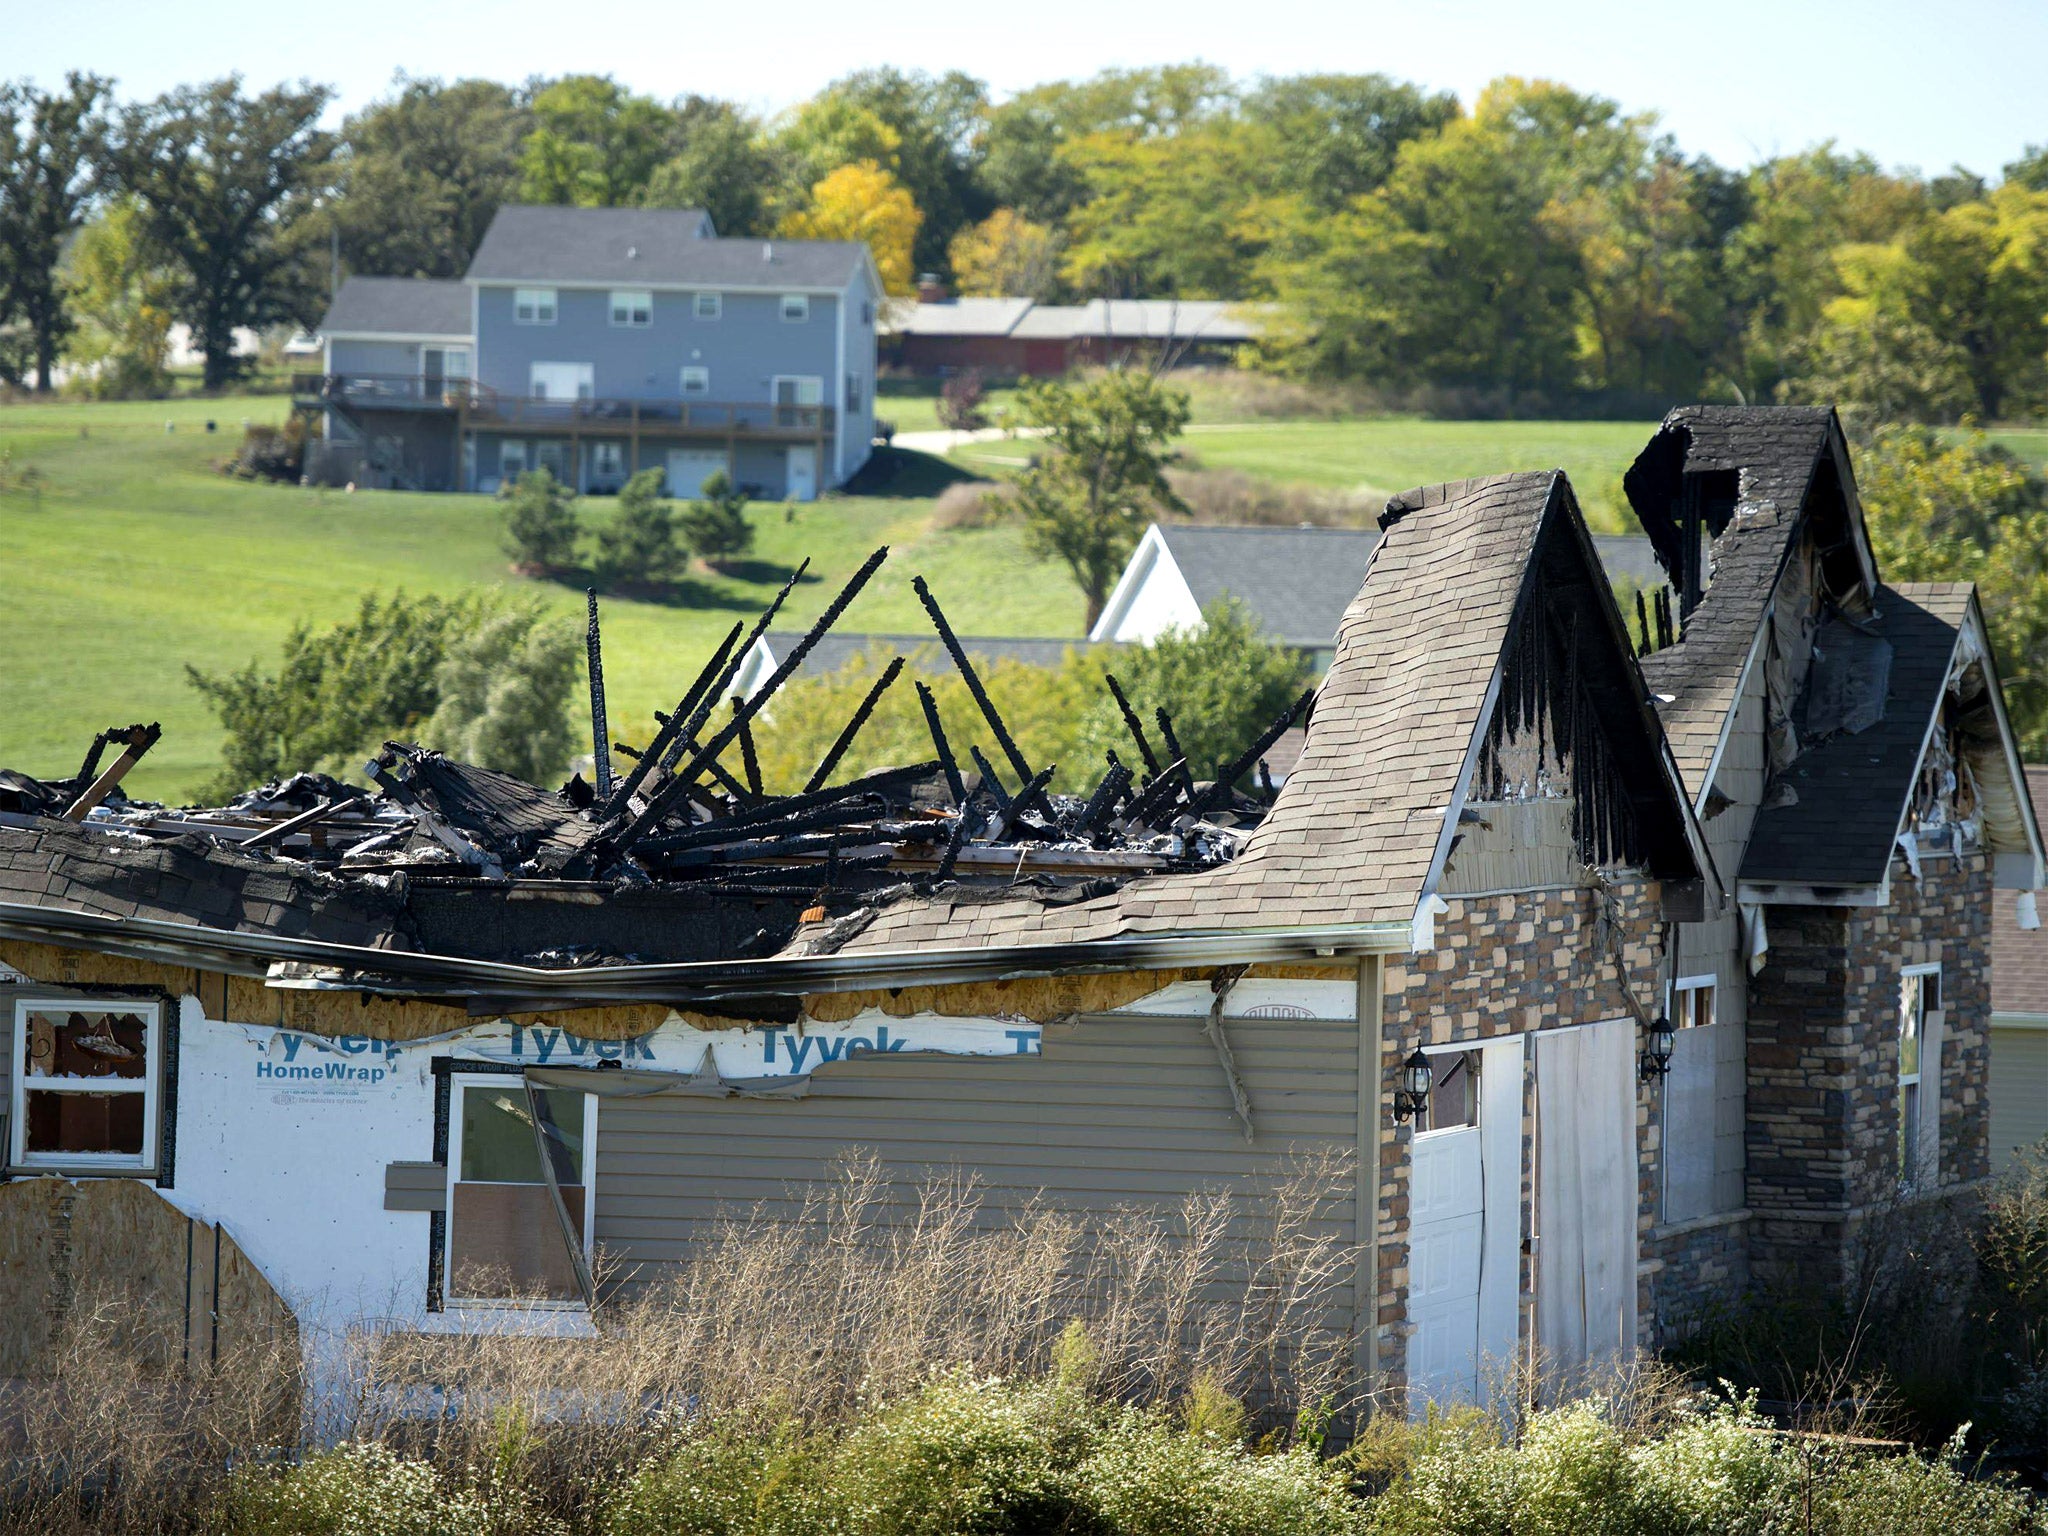 The charred remains of Melinda Coleman’s home in Maryville, Missouri